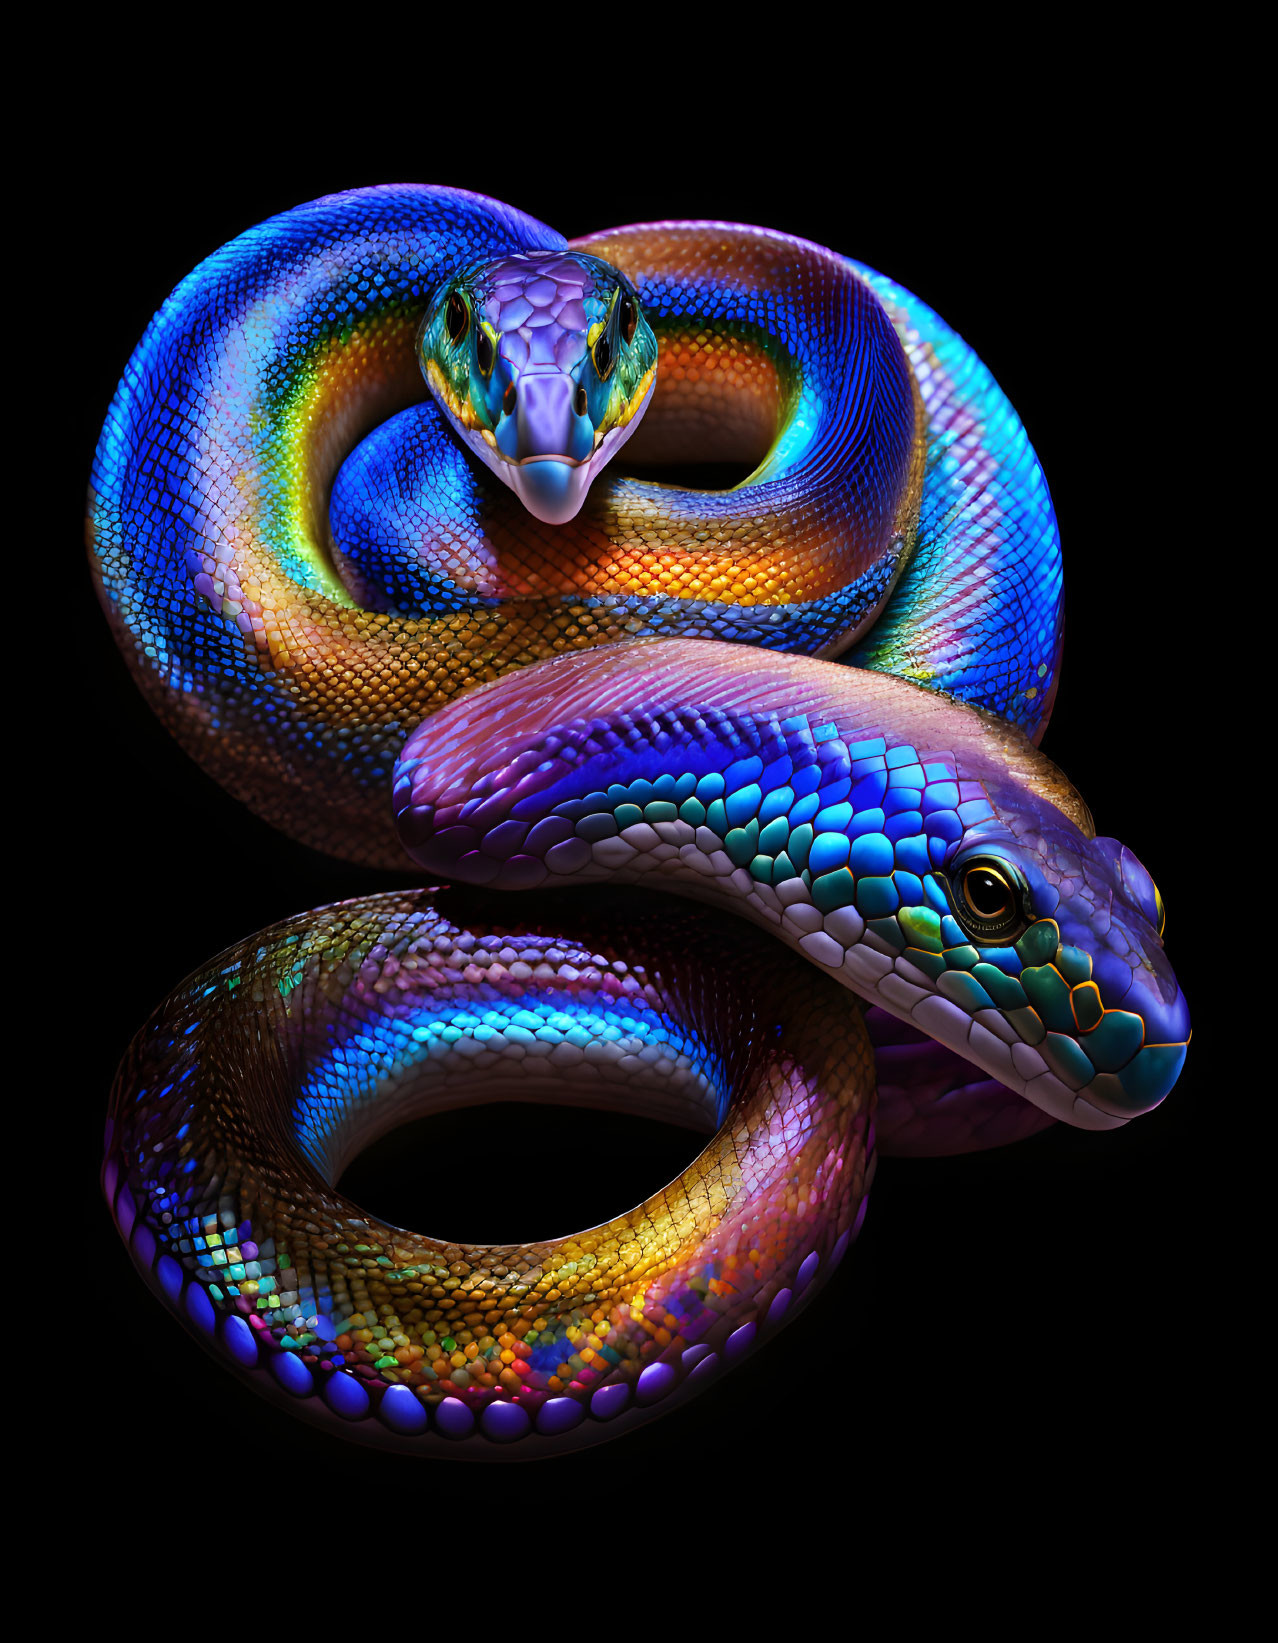 Vibrant digital artwork: Intertwined snakes, iridescent scales, black background